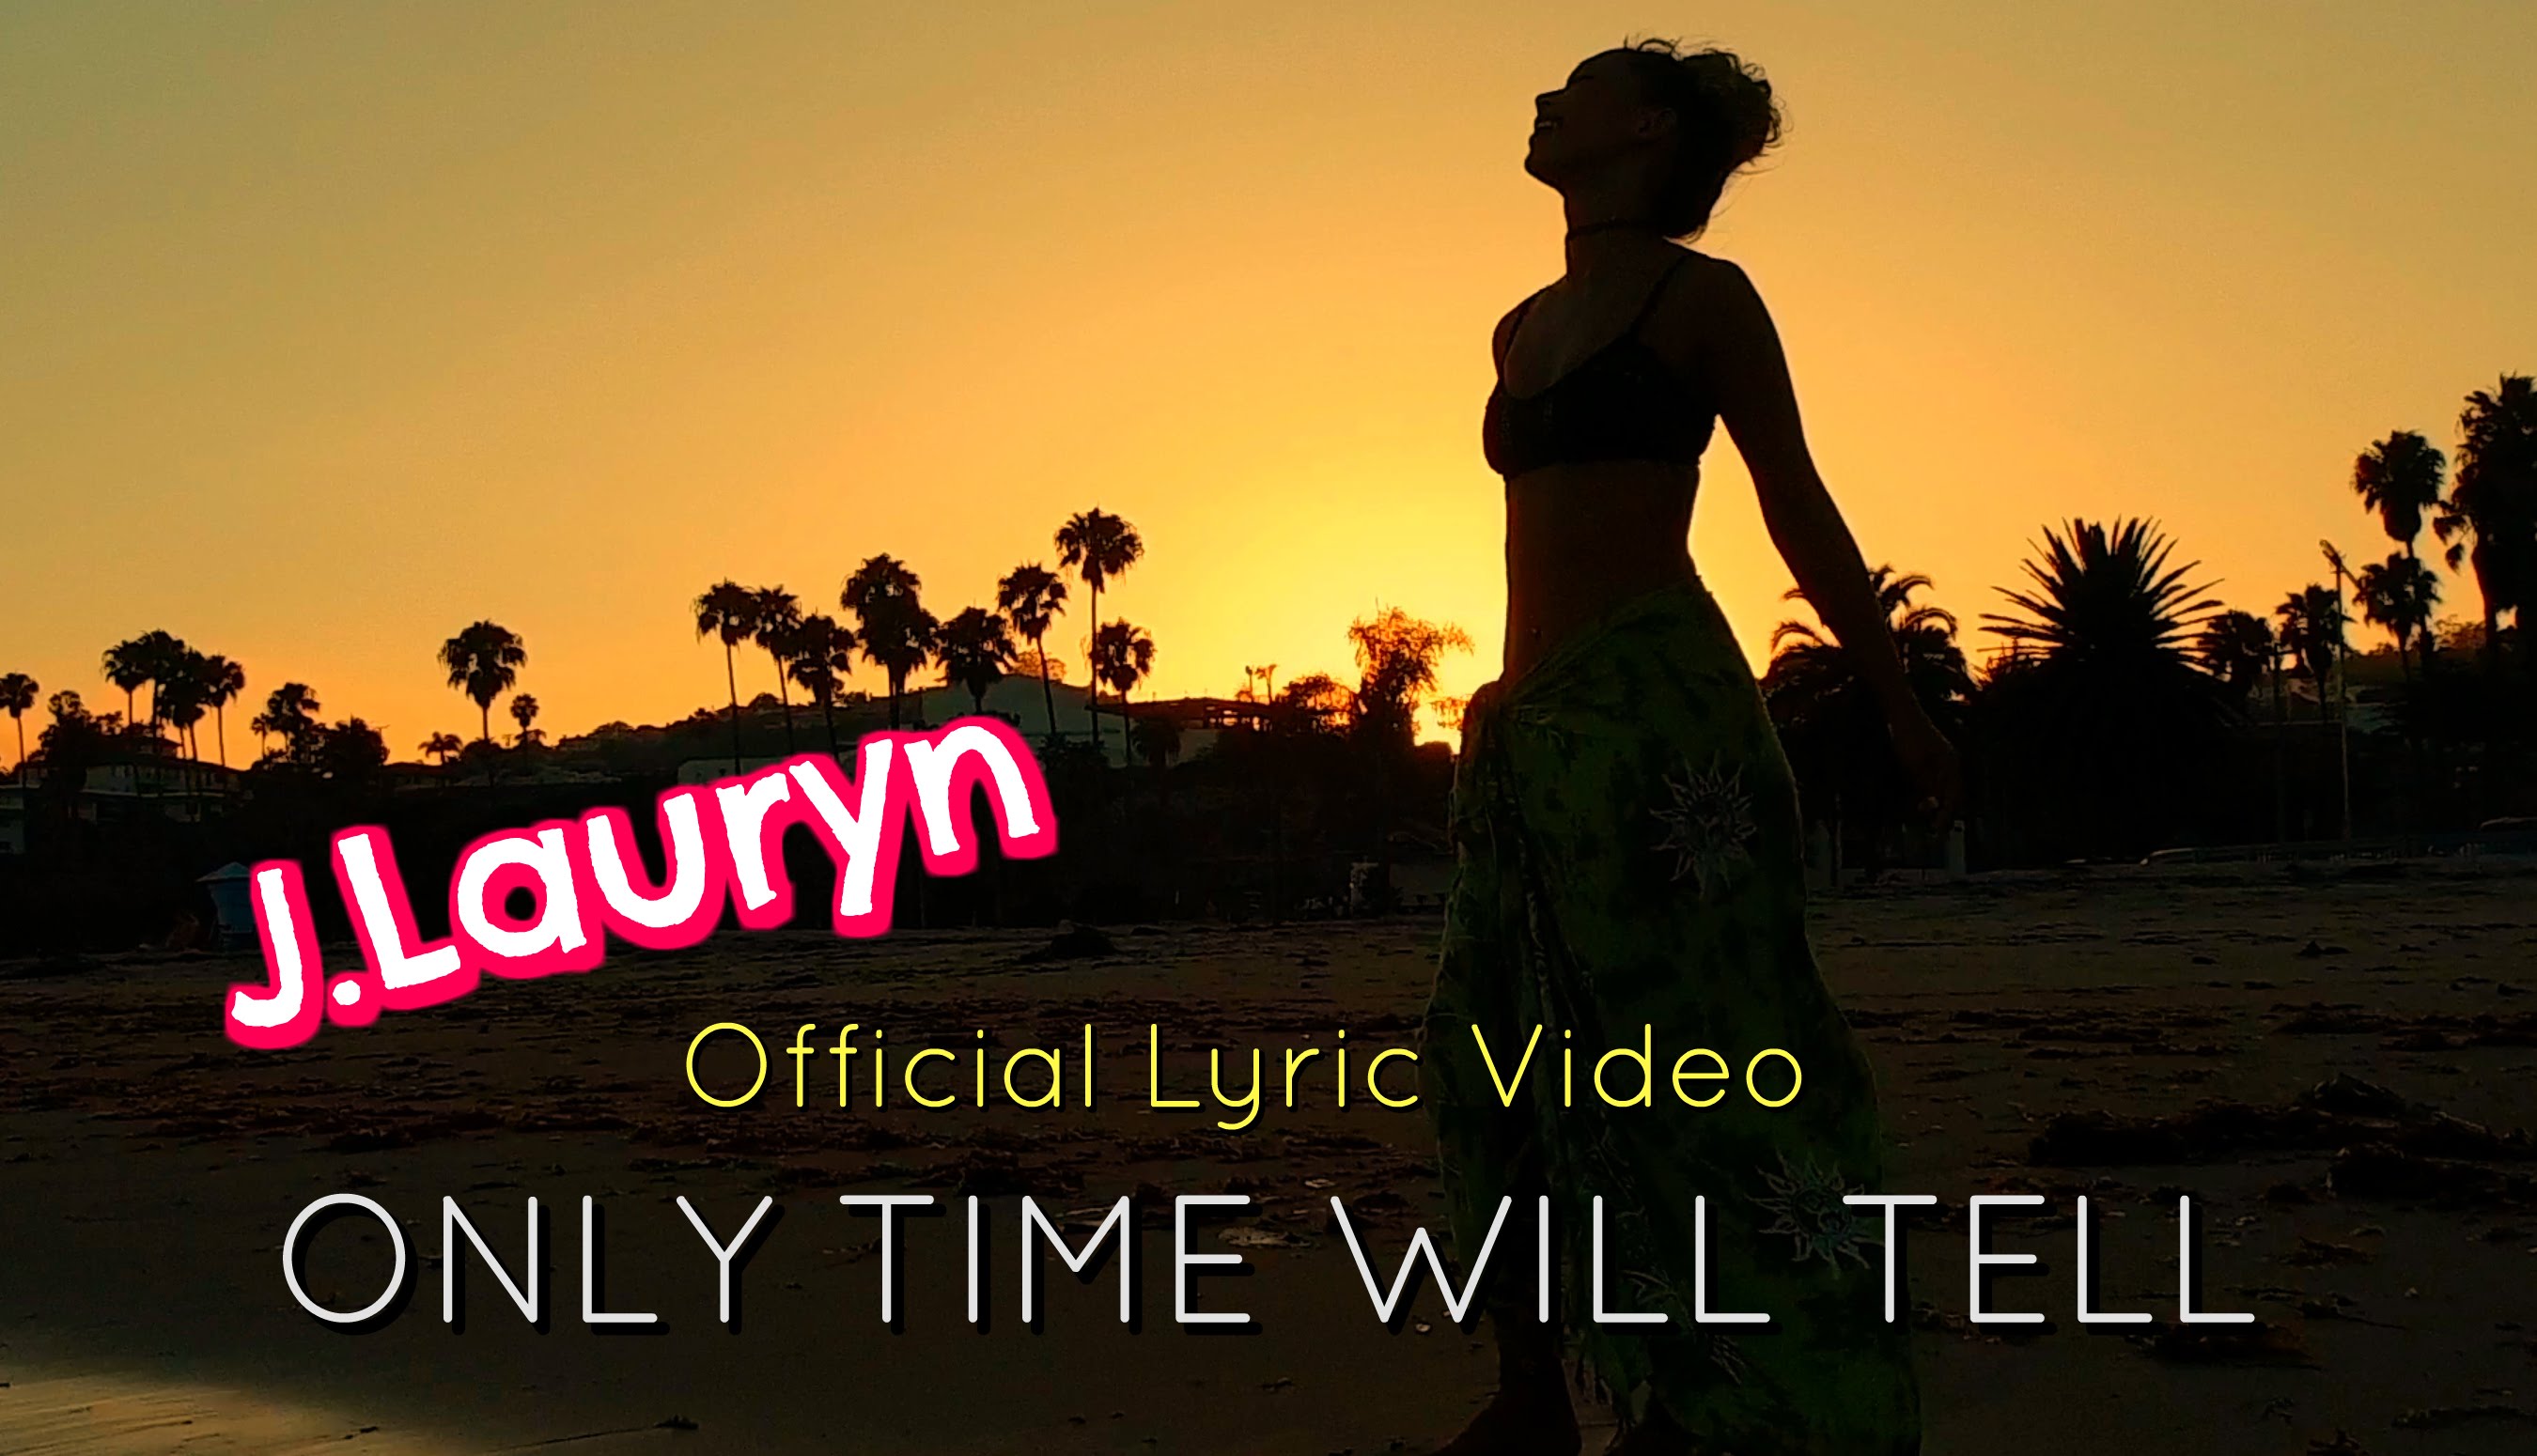 J.Lauryn - Only Time Will Tell (Lyric Video) [8/31/2016]